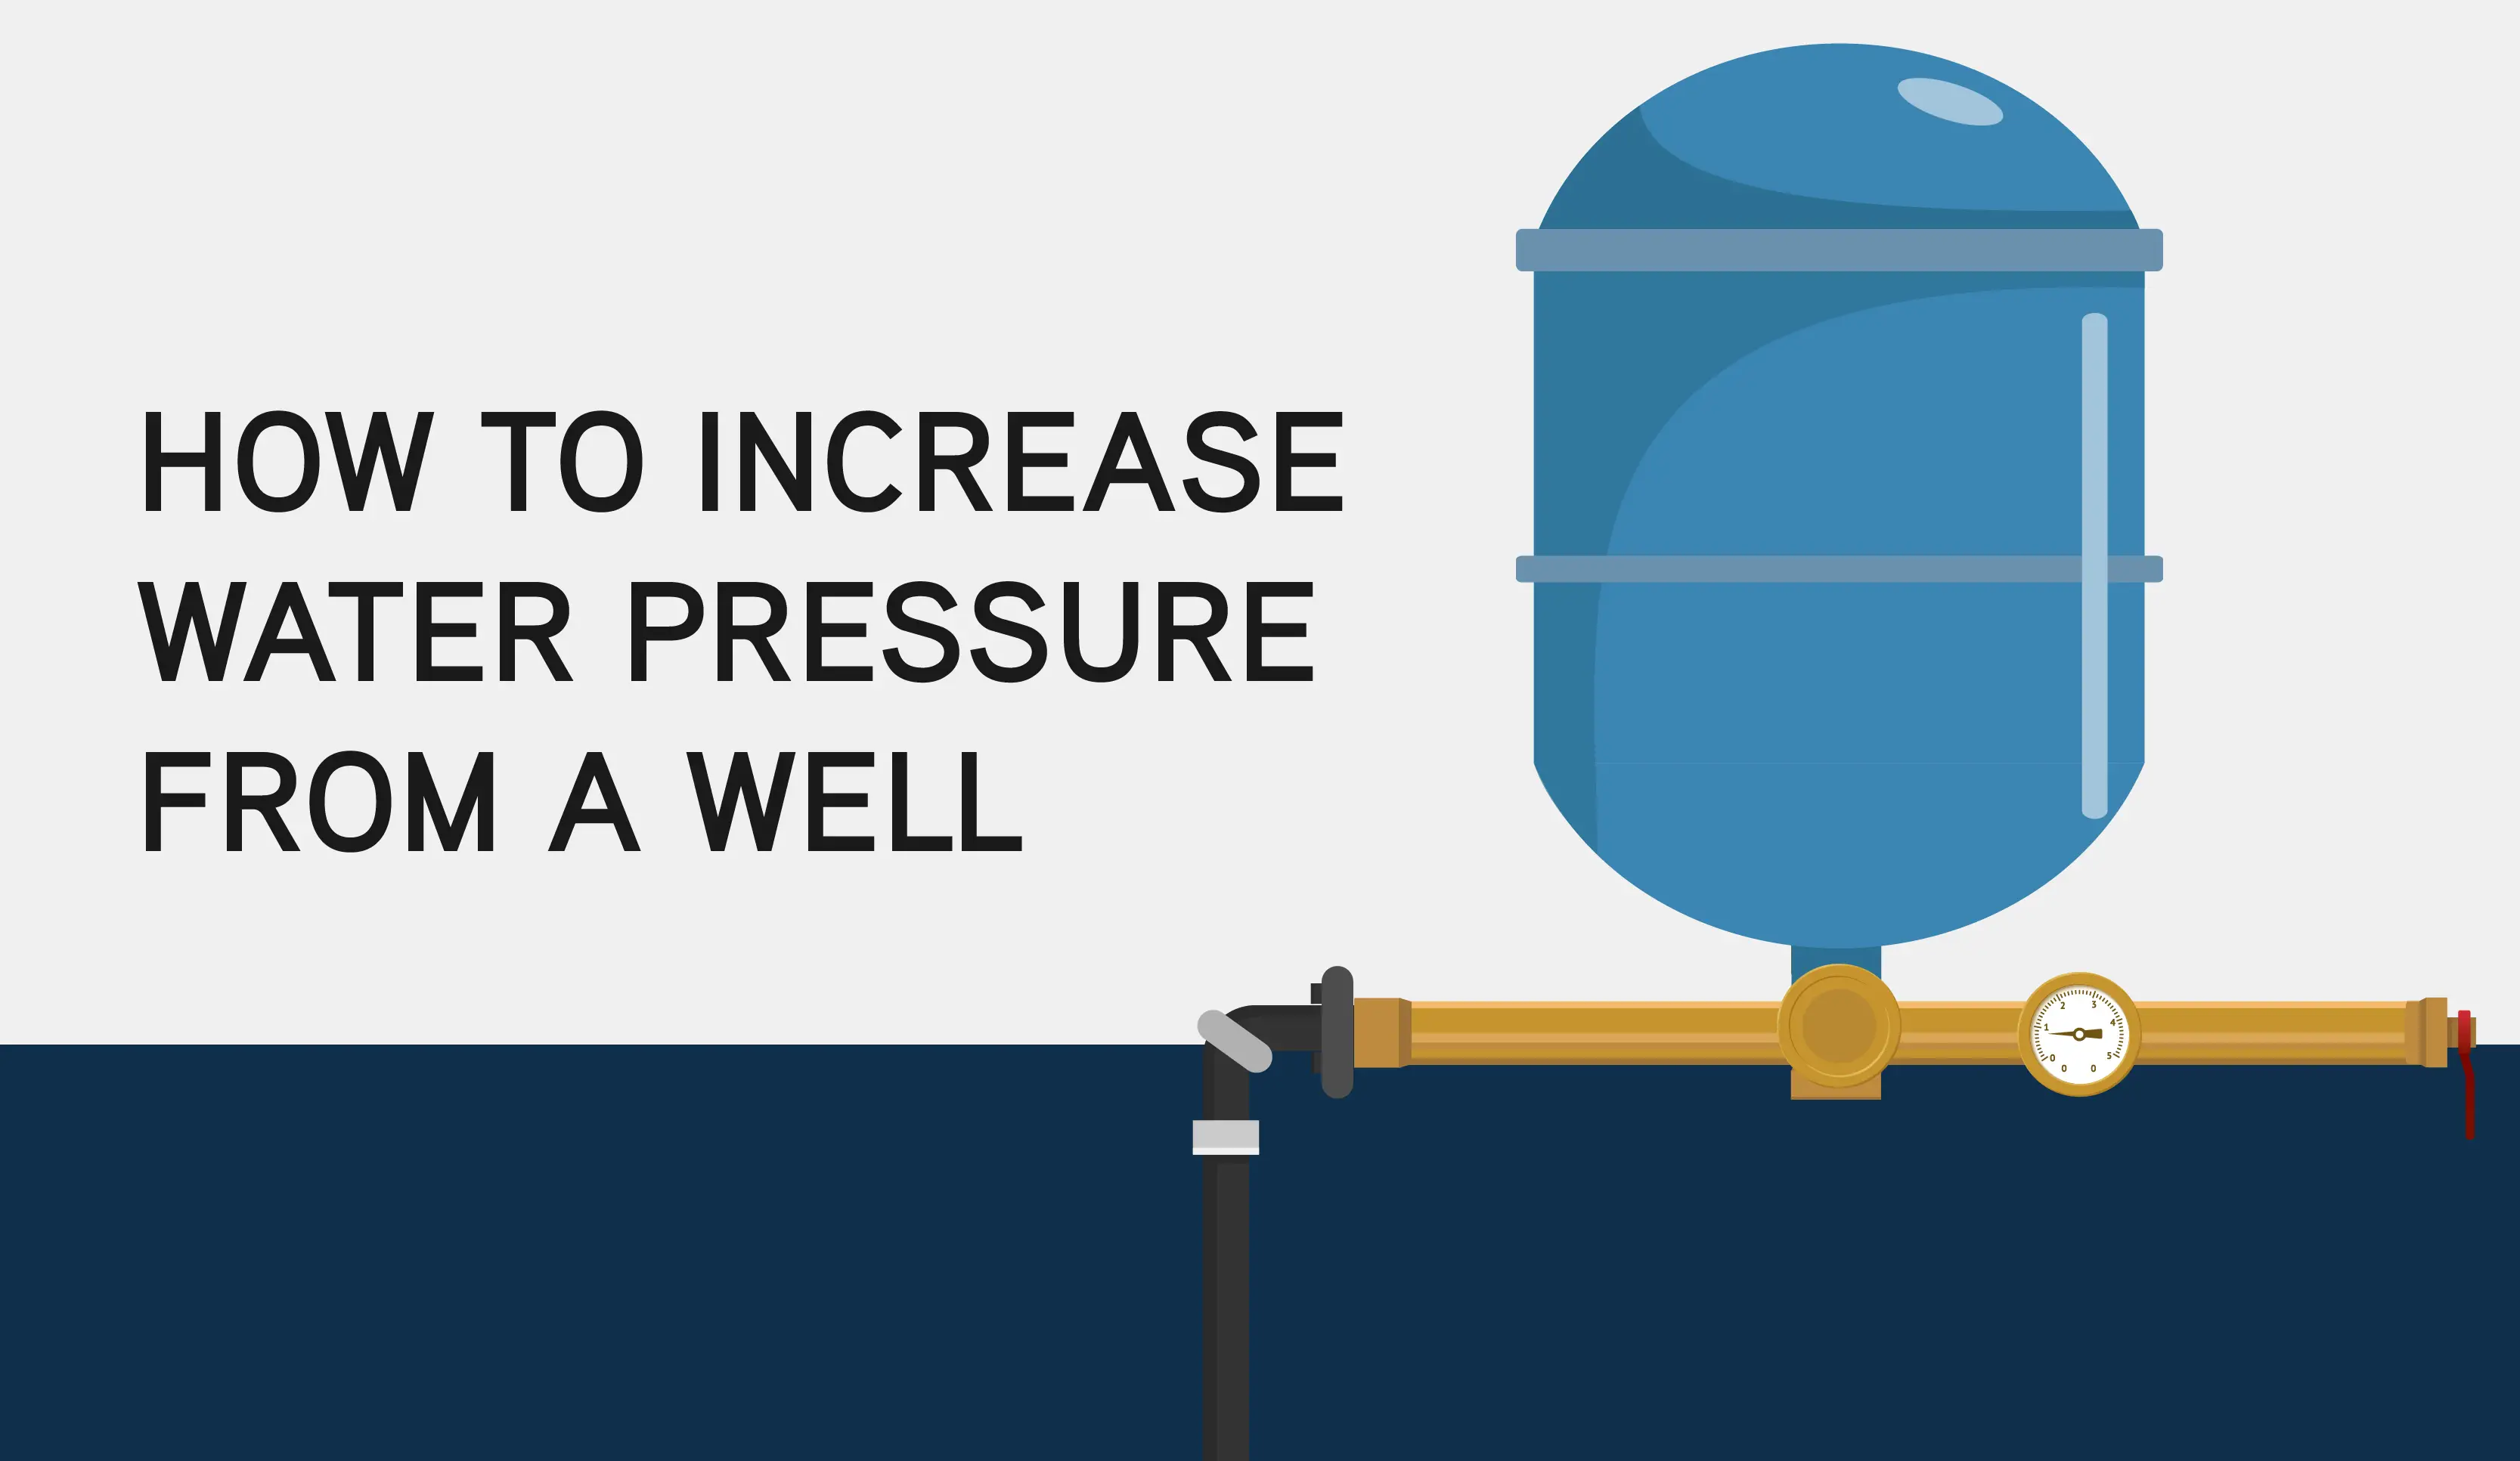 How to increase water pressure 